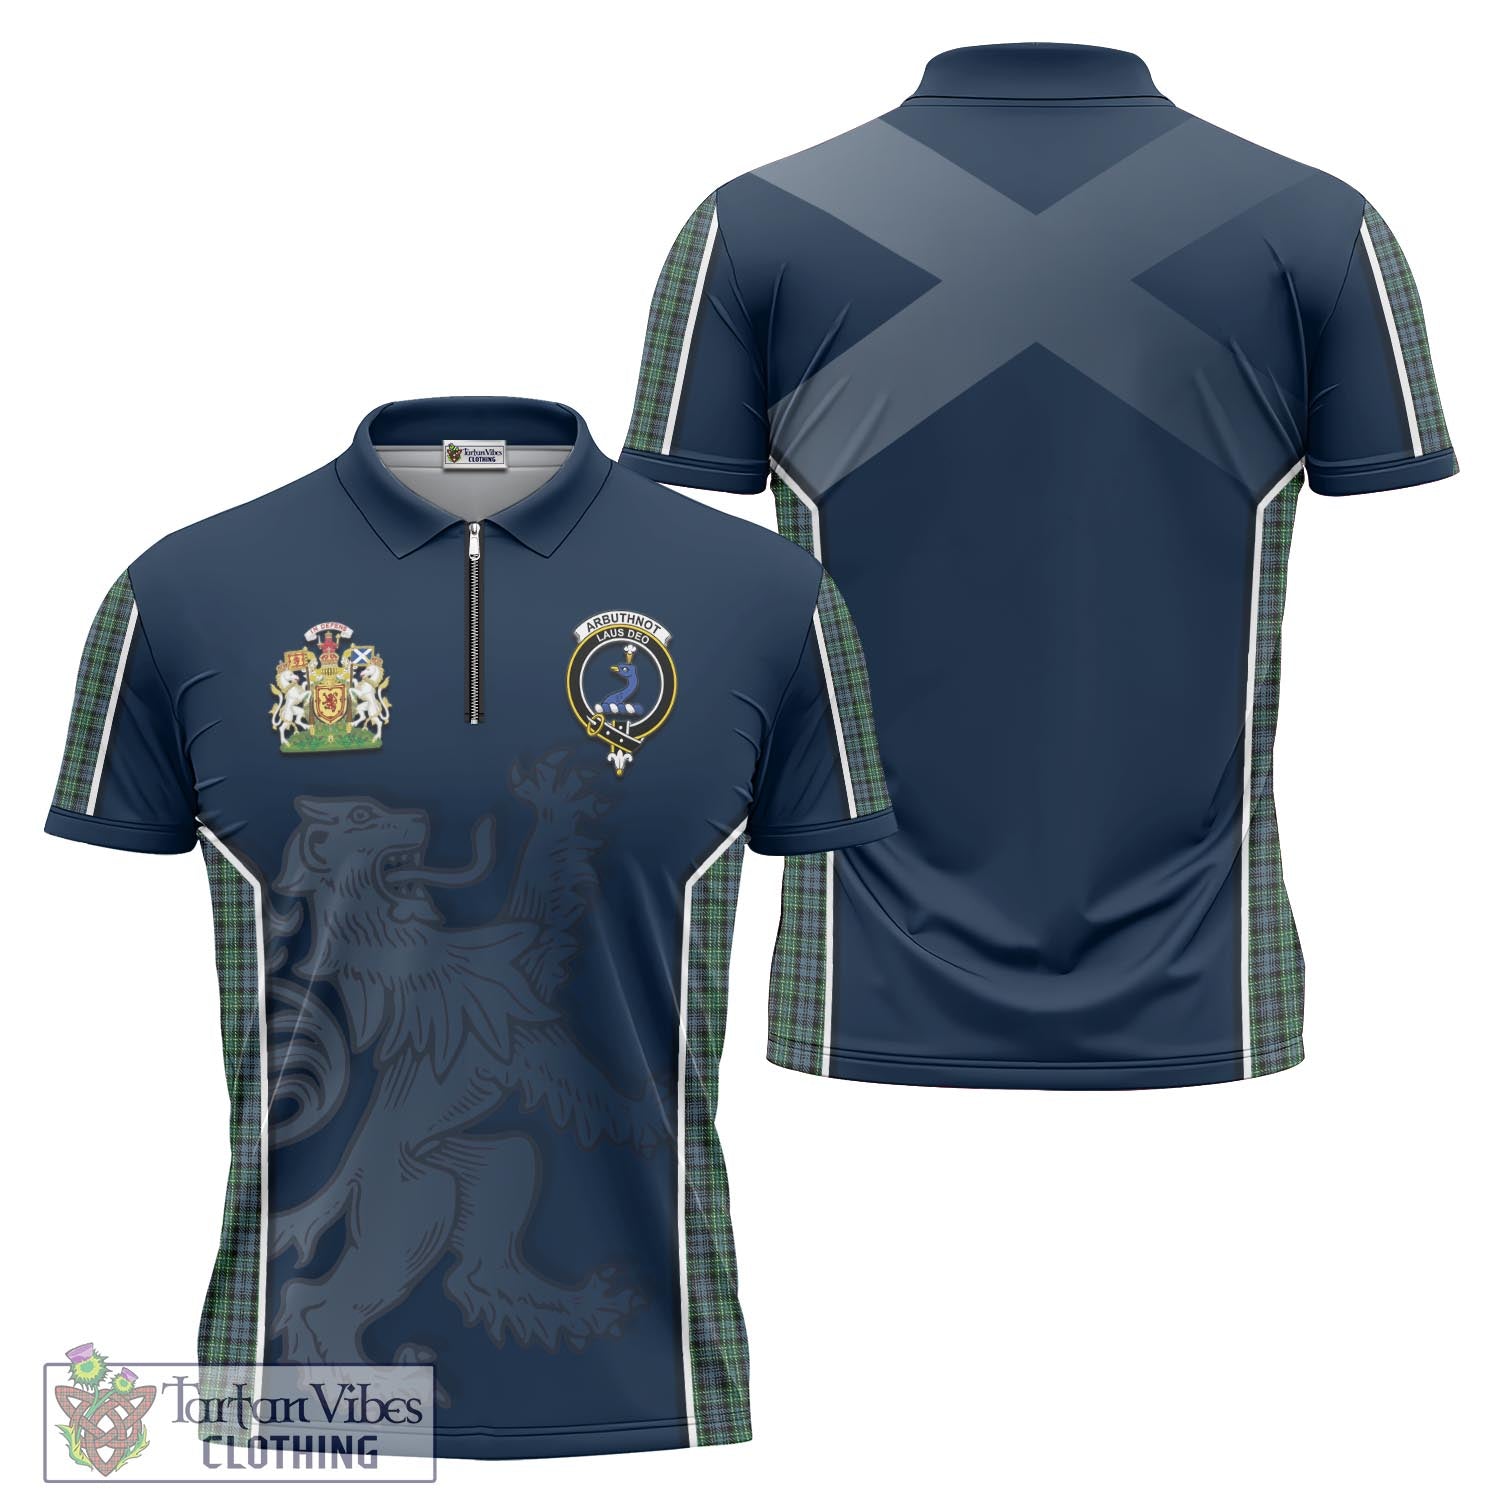 Tartan Vibes Clothing Arbuthnot Tartan Zipper Polo Shirt with Family Crest and Lion Rampant Vibes Sport Style